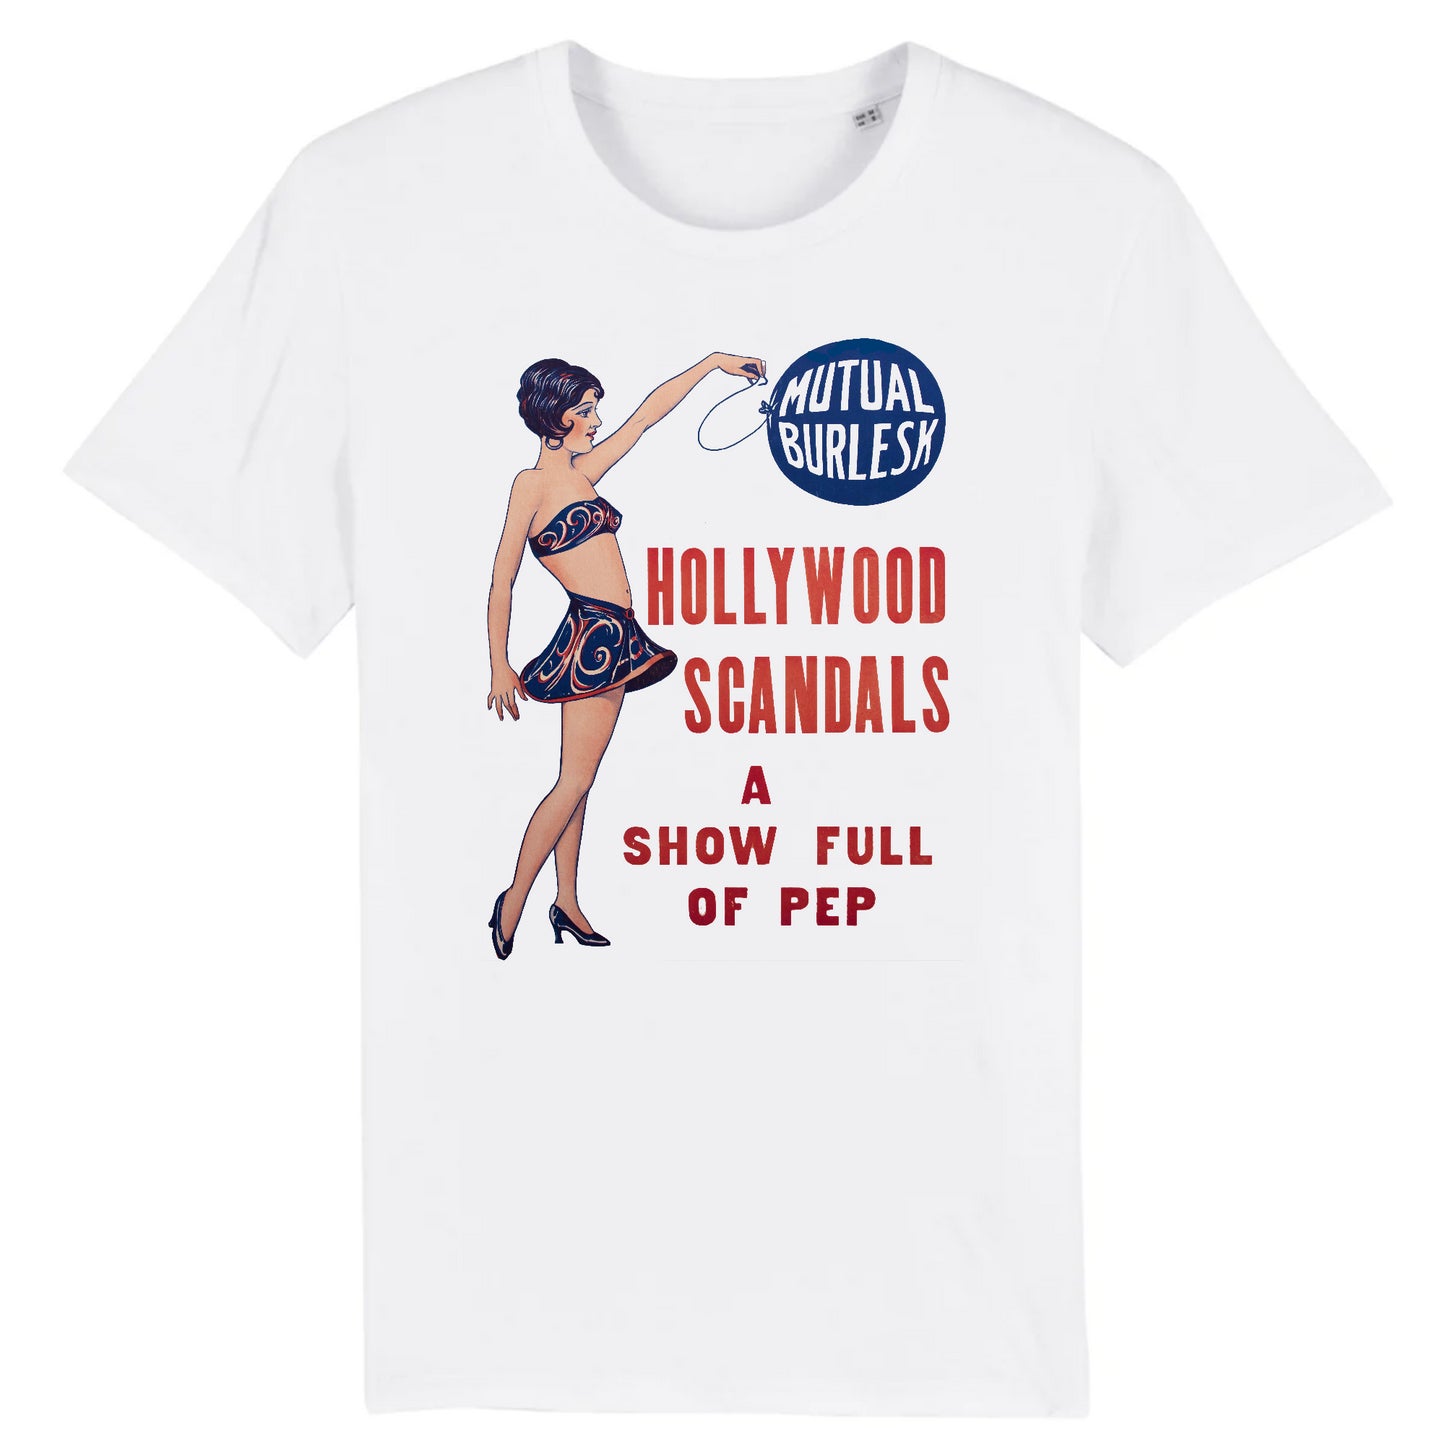 Hollywood Scandals Mutual Burlesque Window Card Poster, 1926 - Organic Cotton T-Shirt